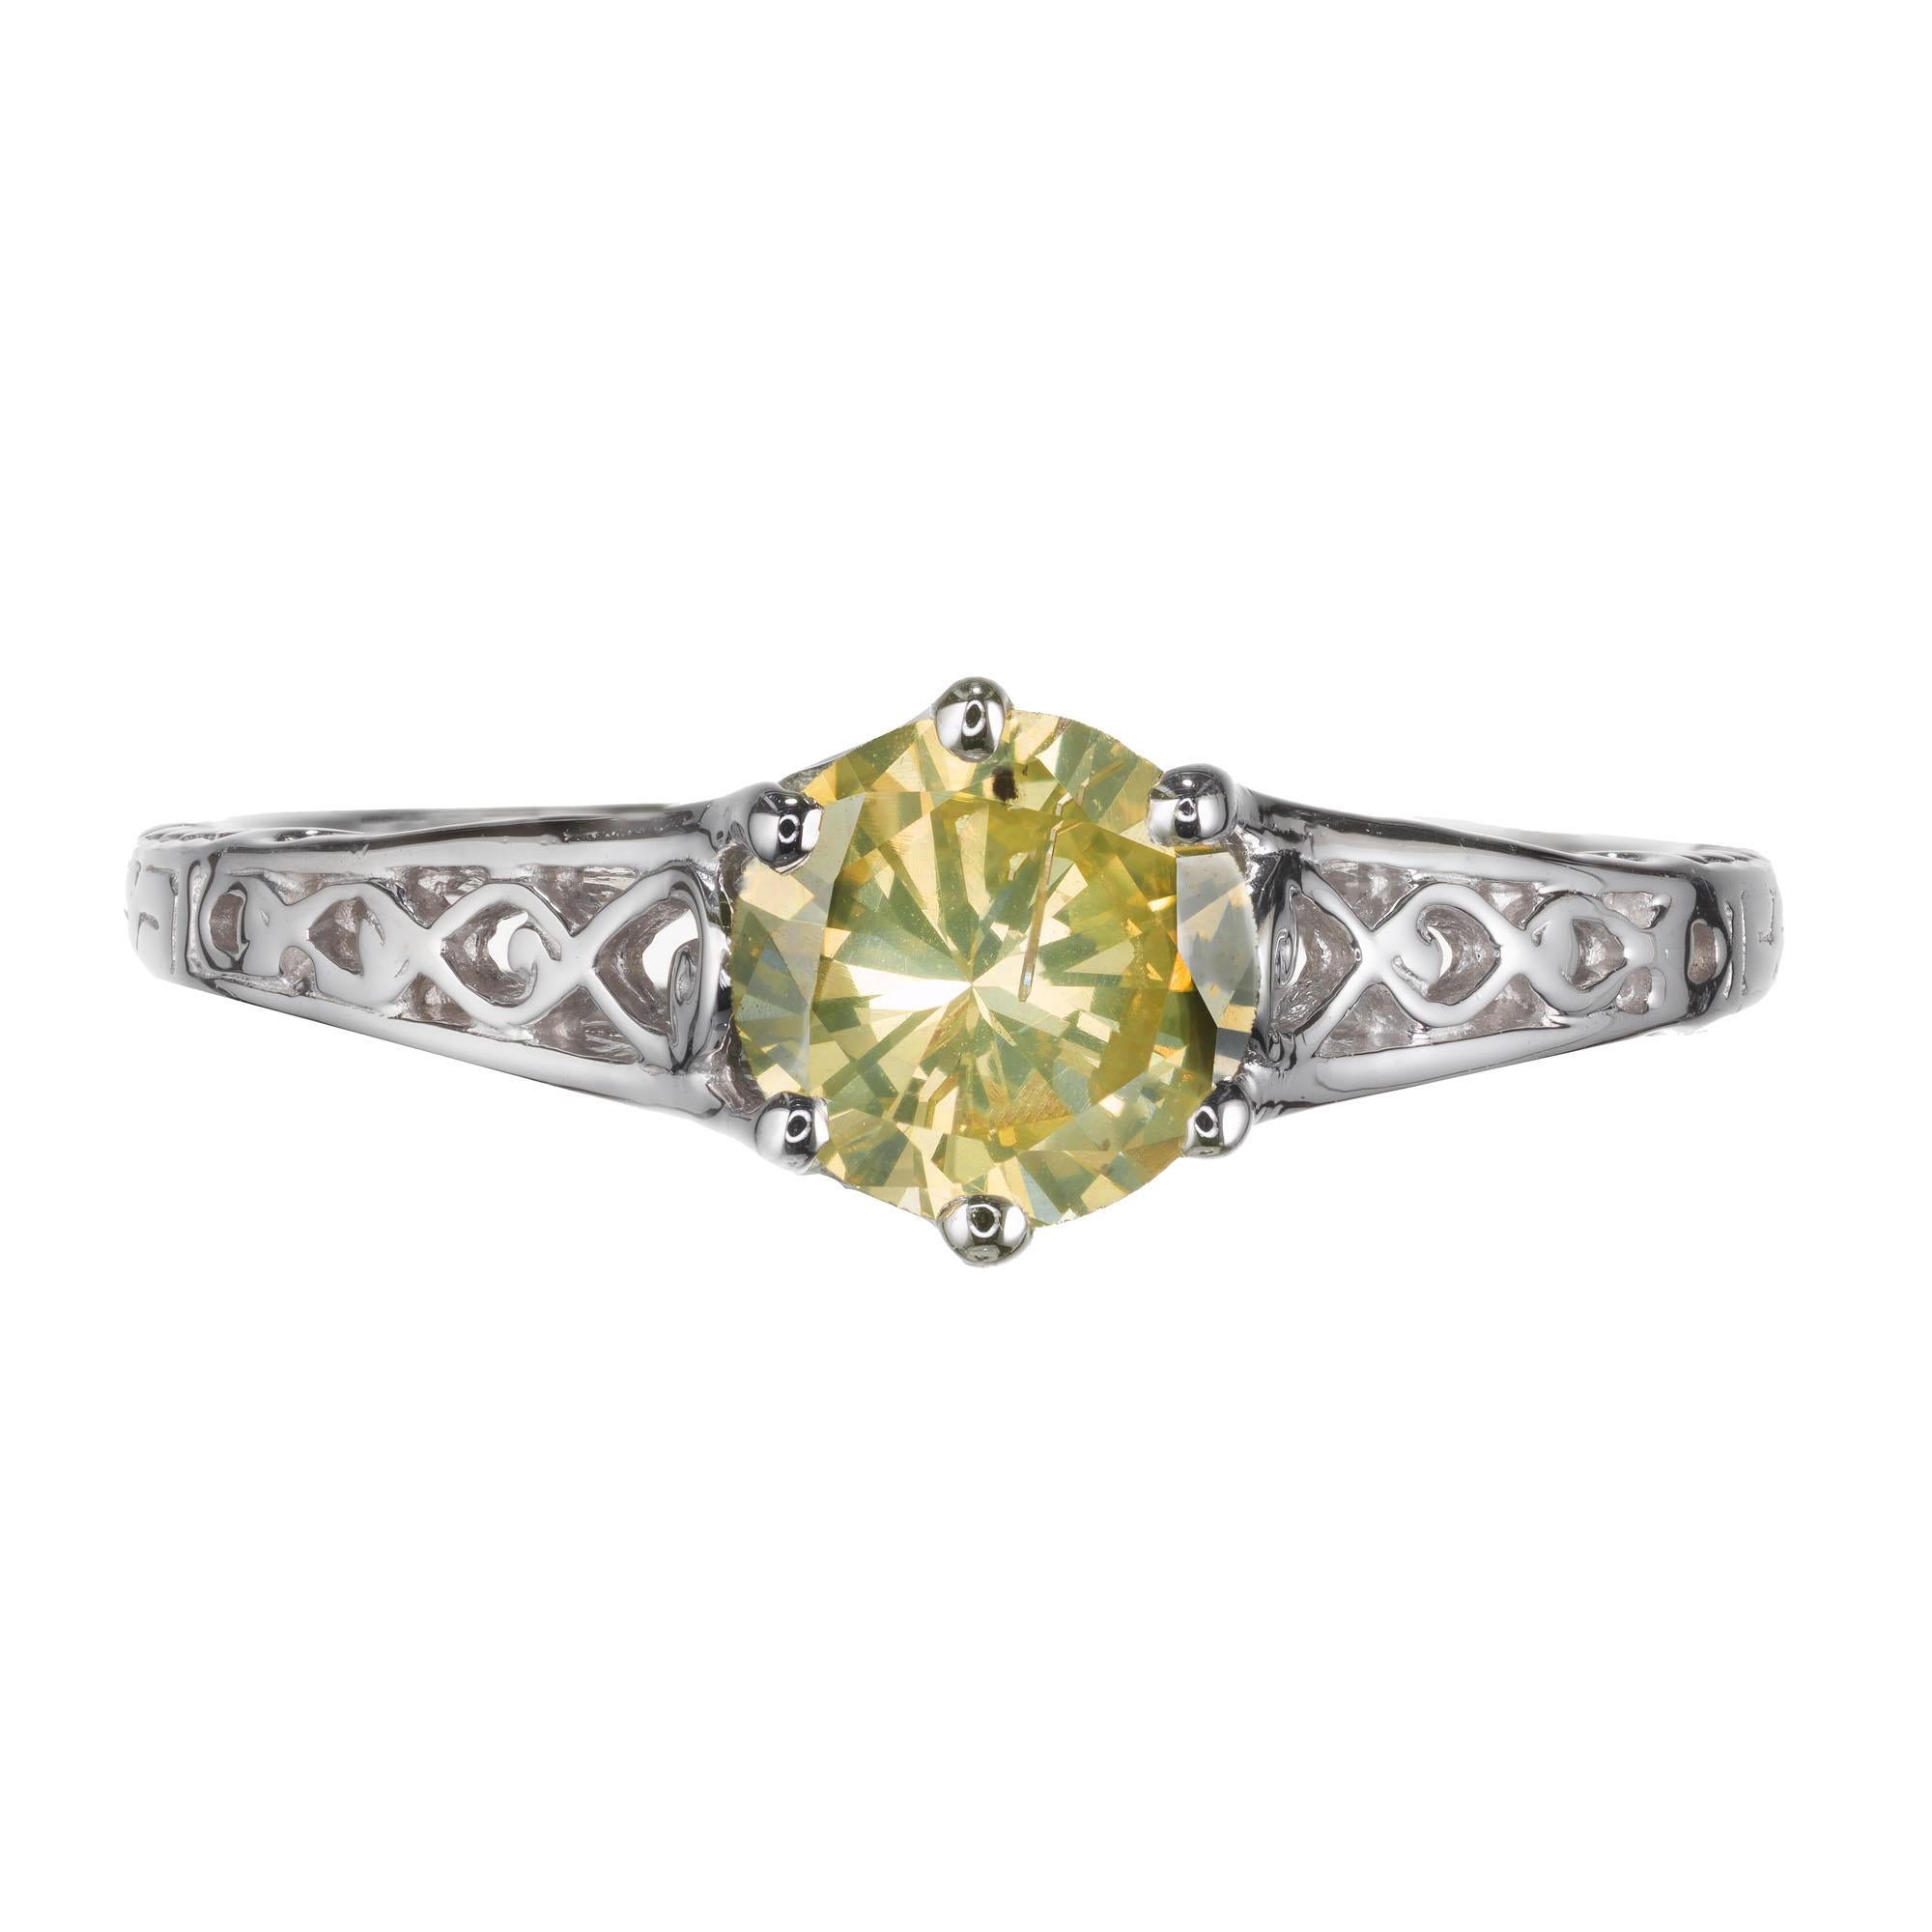 Vintage 1940's yellow and greenish diamond filigree engagement ring. GIA Certified natural diamond center stone in a 14k white gold setting. 

1 round brilliant cut fancy natural grayish greenish yellow diamond I, approx. .65ct GIA Certificate #